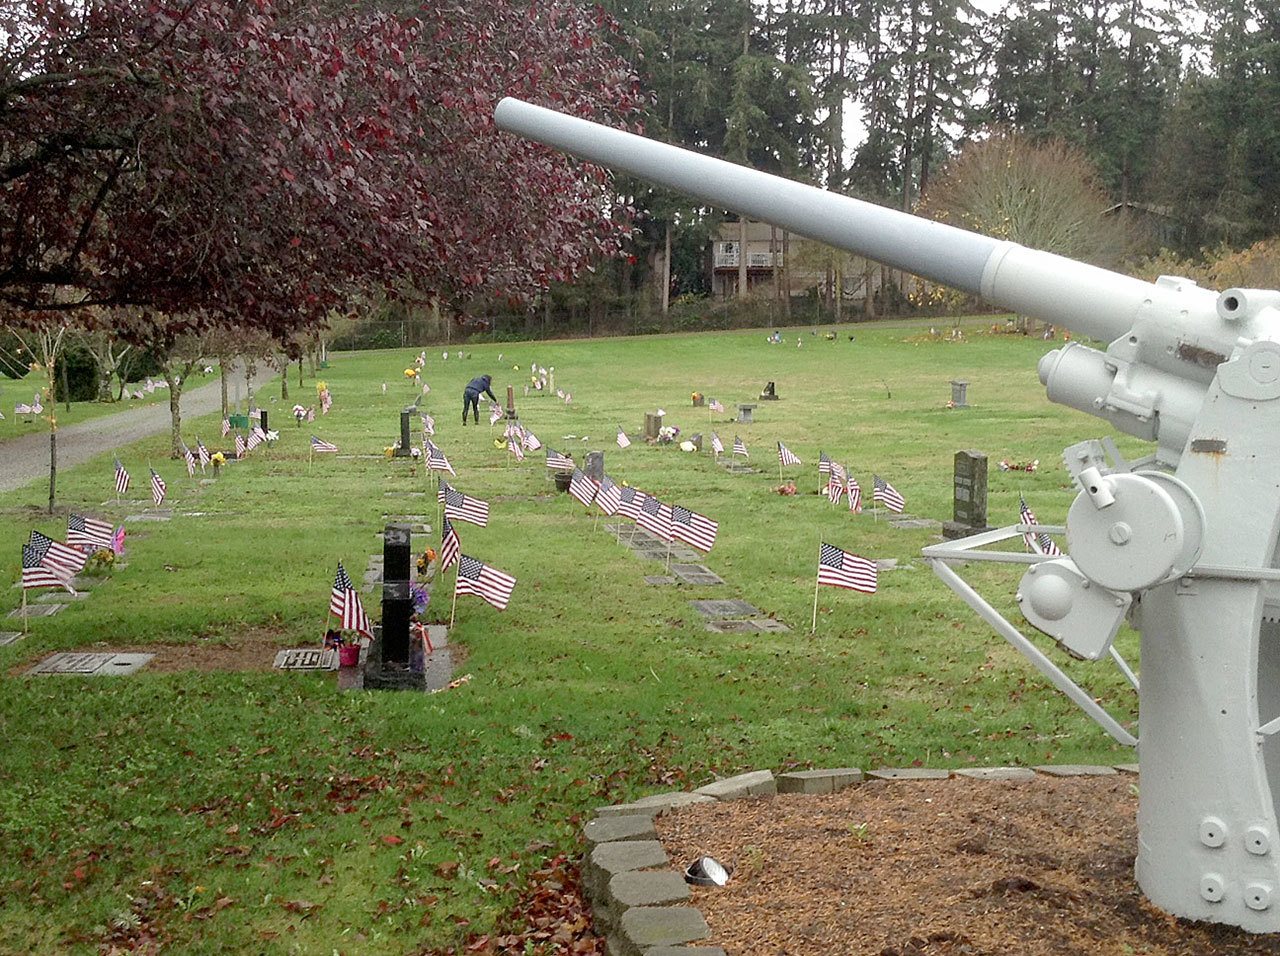 On Saturday, Nov. 5, members of Military Officers Association of America, Oak Harbor High School’s NJROTC and Boy Scout Troops 4059 and 4081 placed about 1,500 flags at the graves of deceased veterans in Island County cemeteries. Flags will be retrieved on Sunday, Nov. 12. This is the fourth year for this annual project. Photo by David G. Cohick